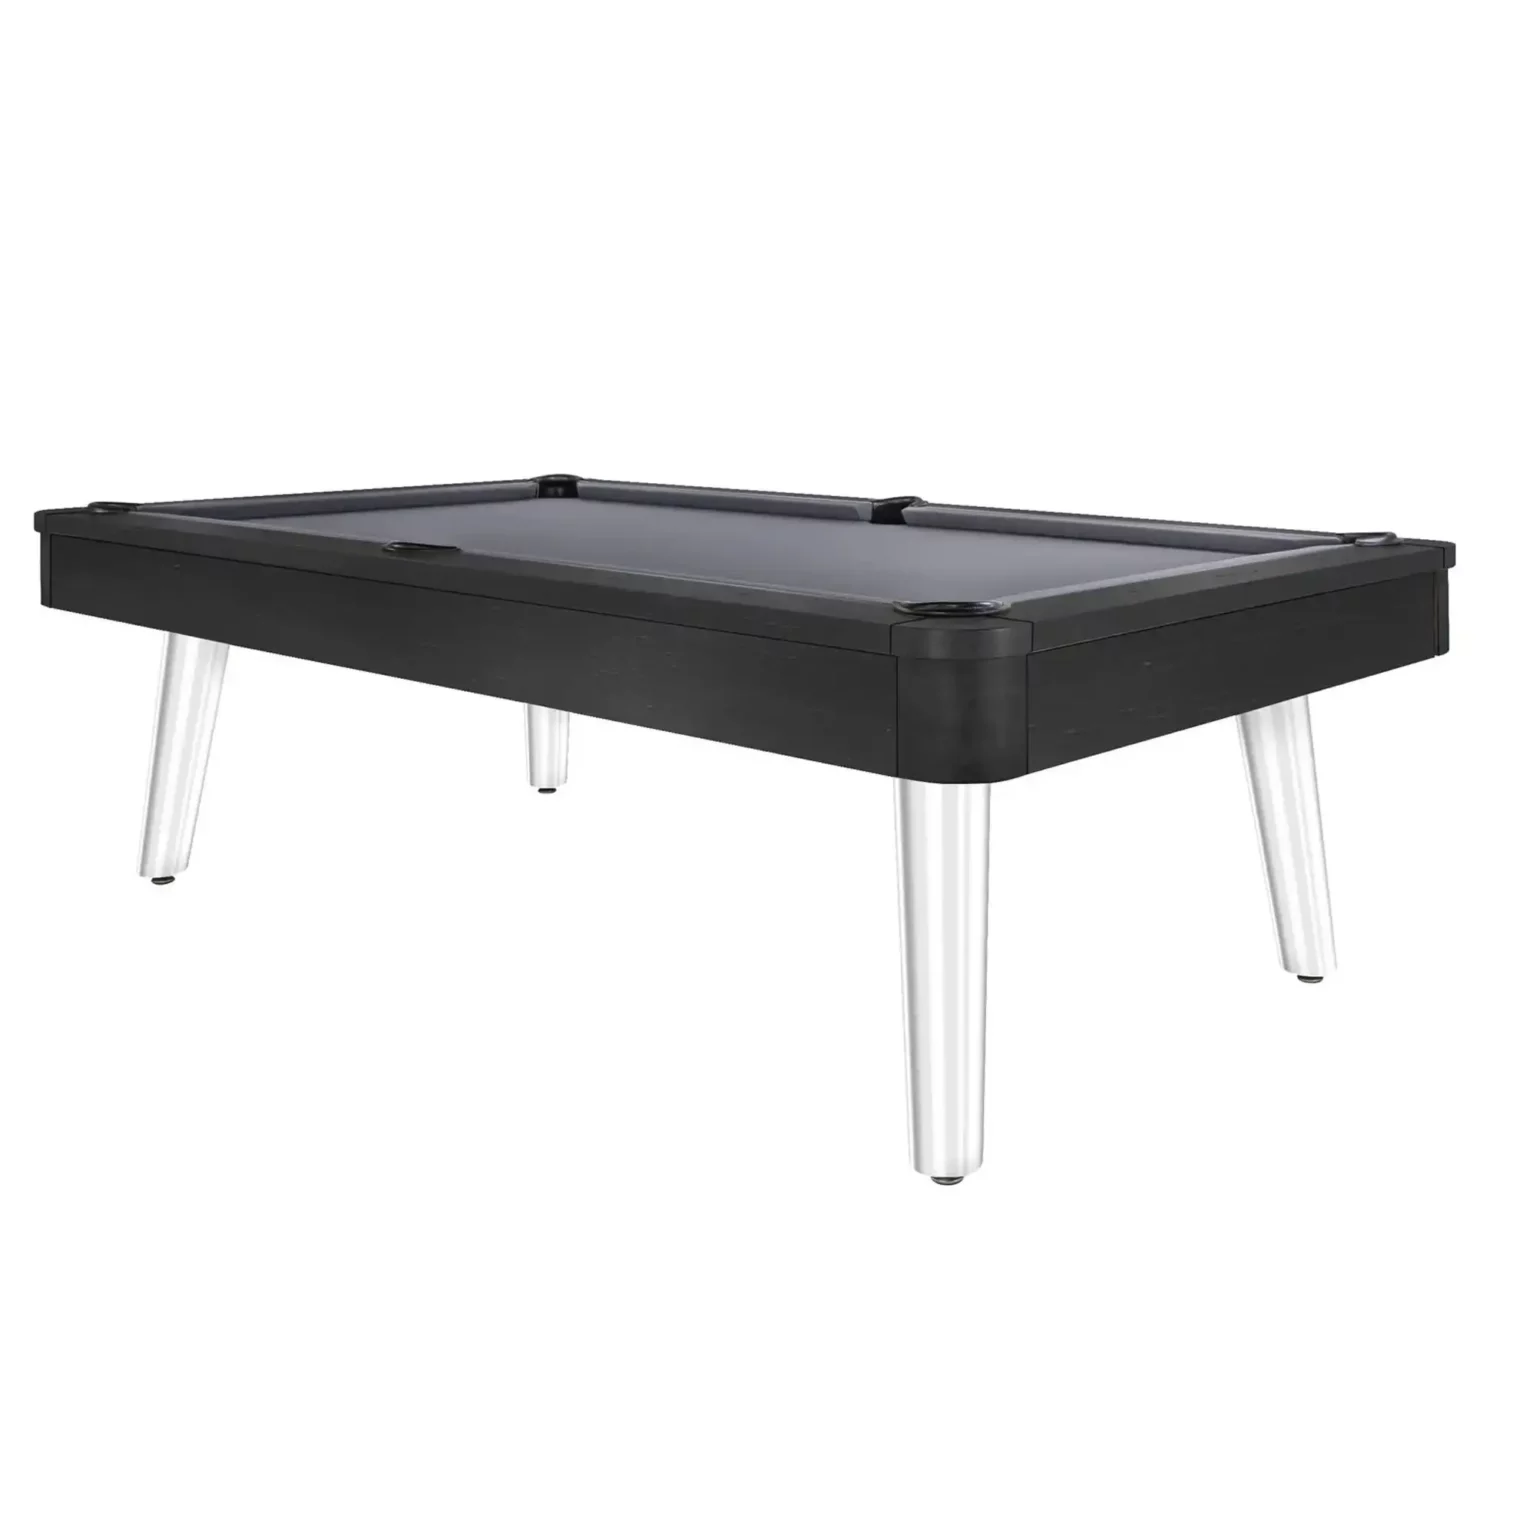 Percy Legacy Pool Table